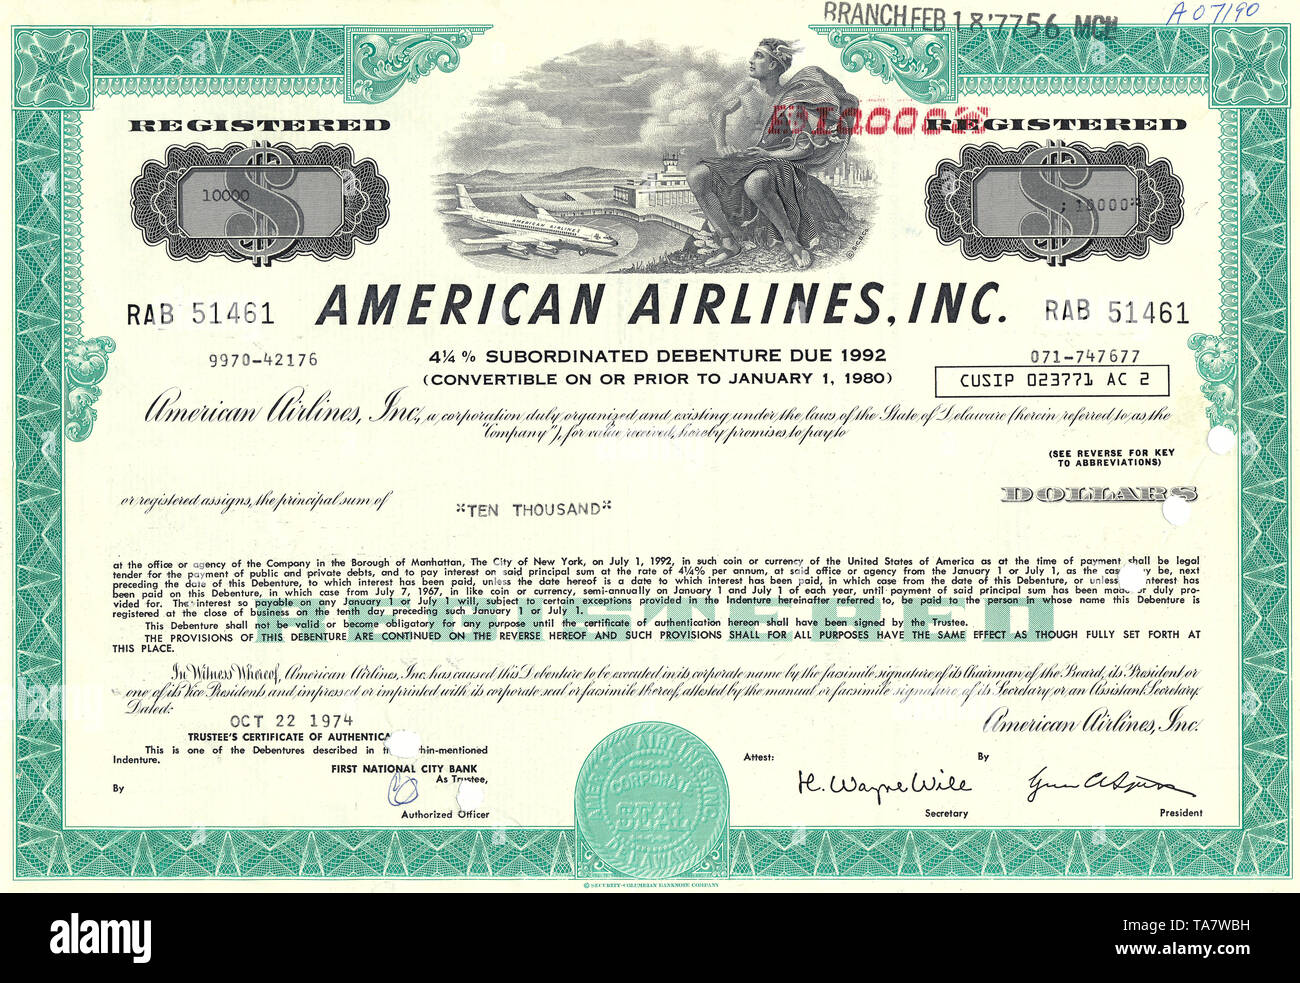 Bonds Certificate High Resolution Stock Photography and Images - Alamy Pertaining To Corporate Bond Certificate Template